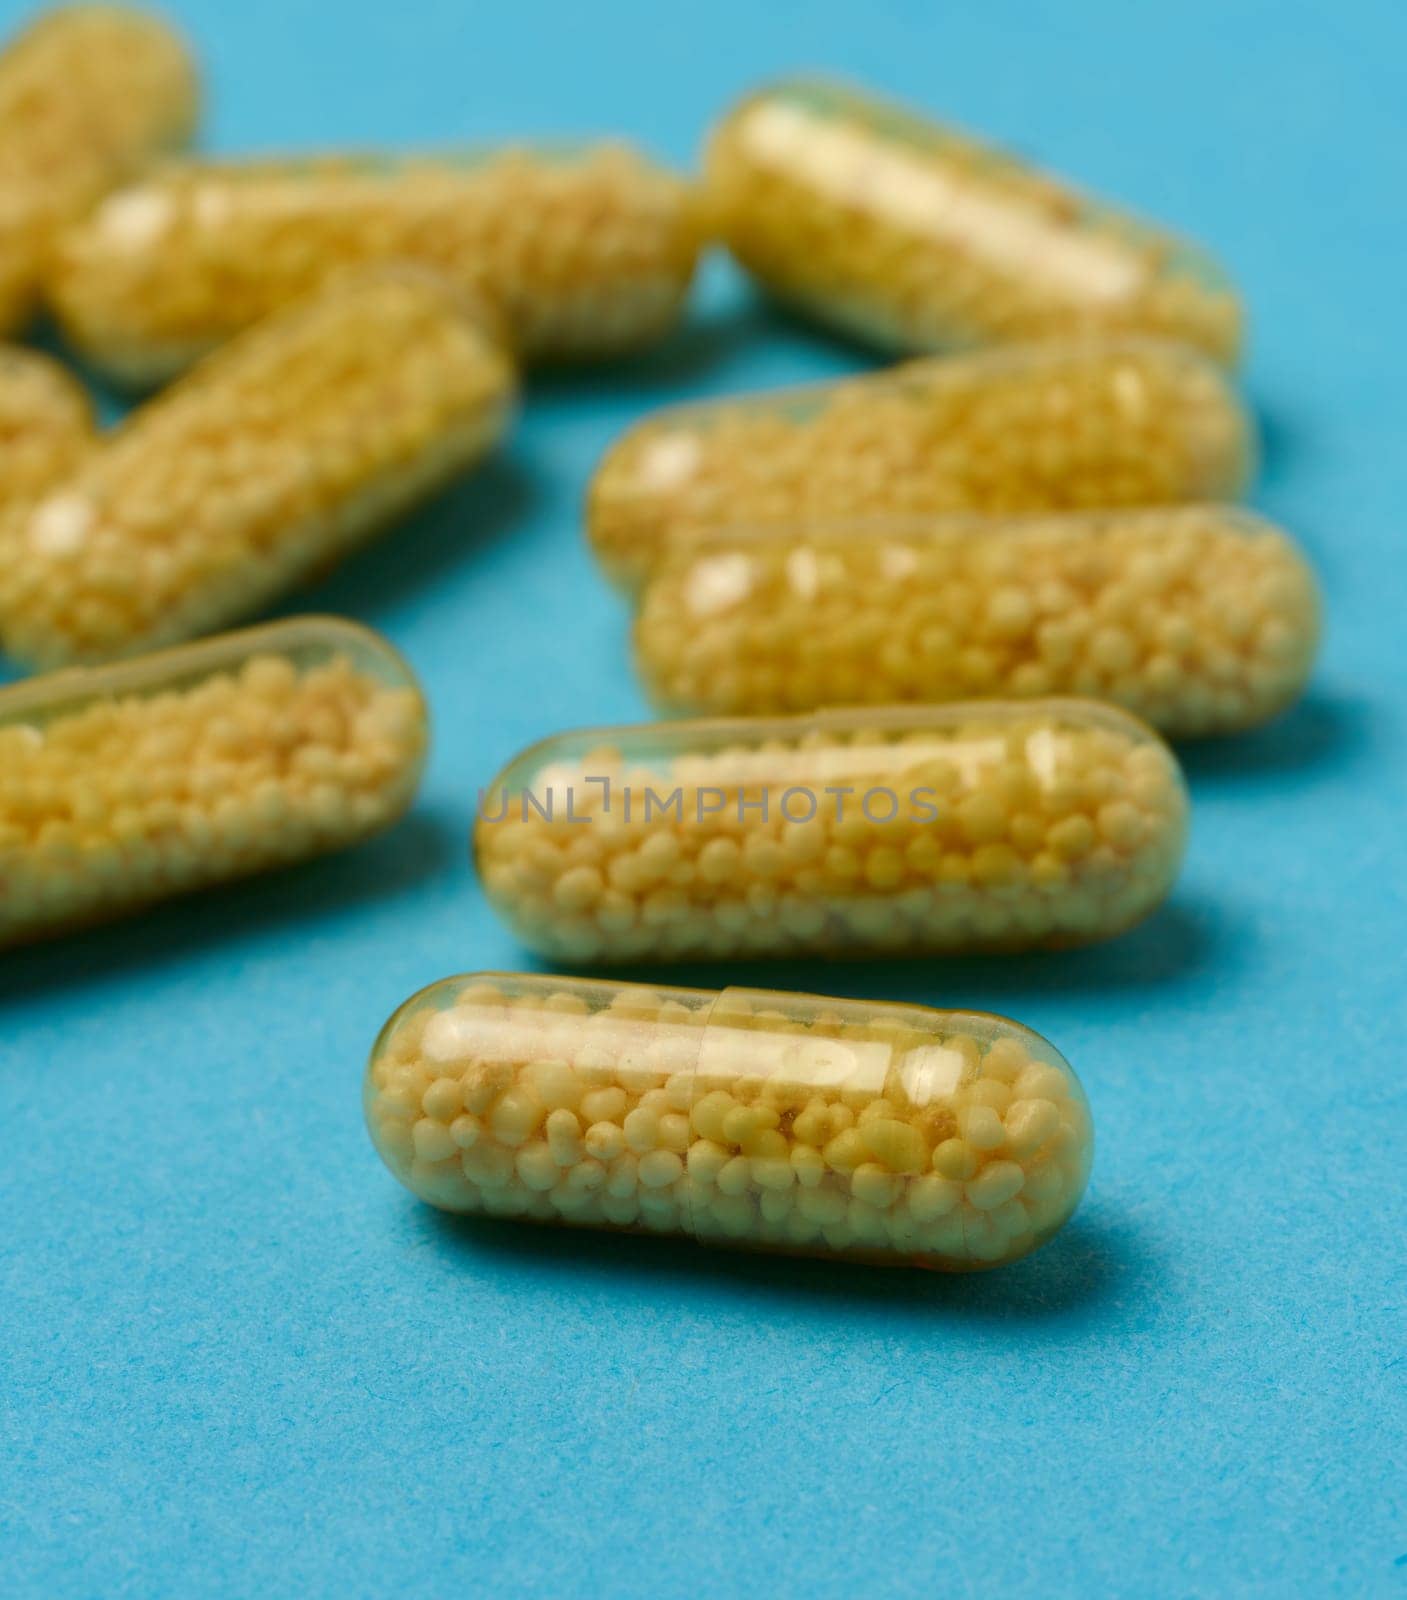 Transparent medical capsules with yellow granules inside on a blue background, tablets for treatment, vitamins